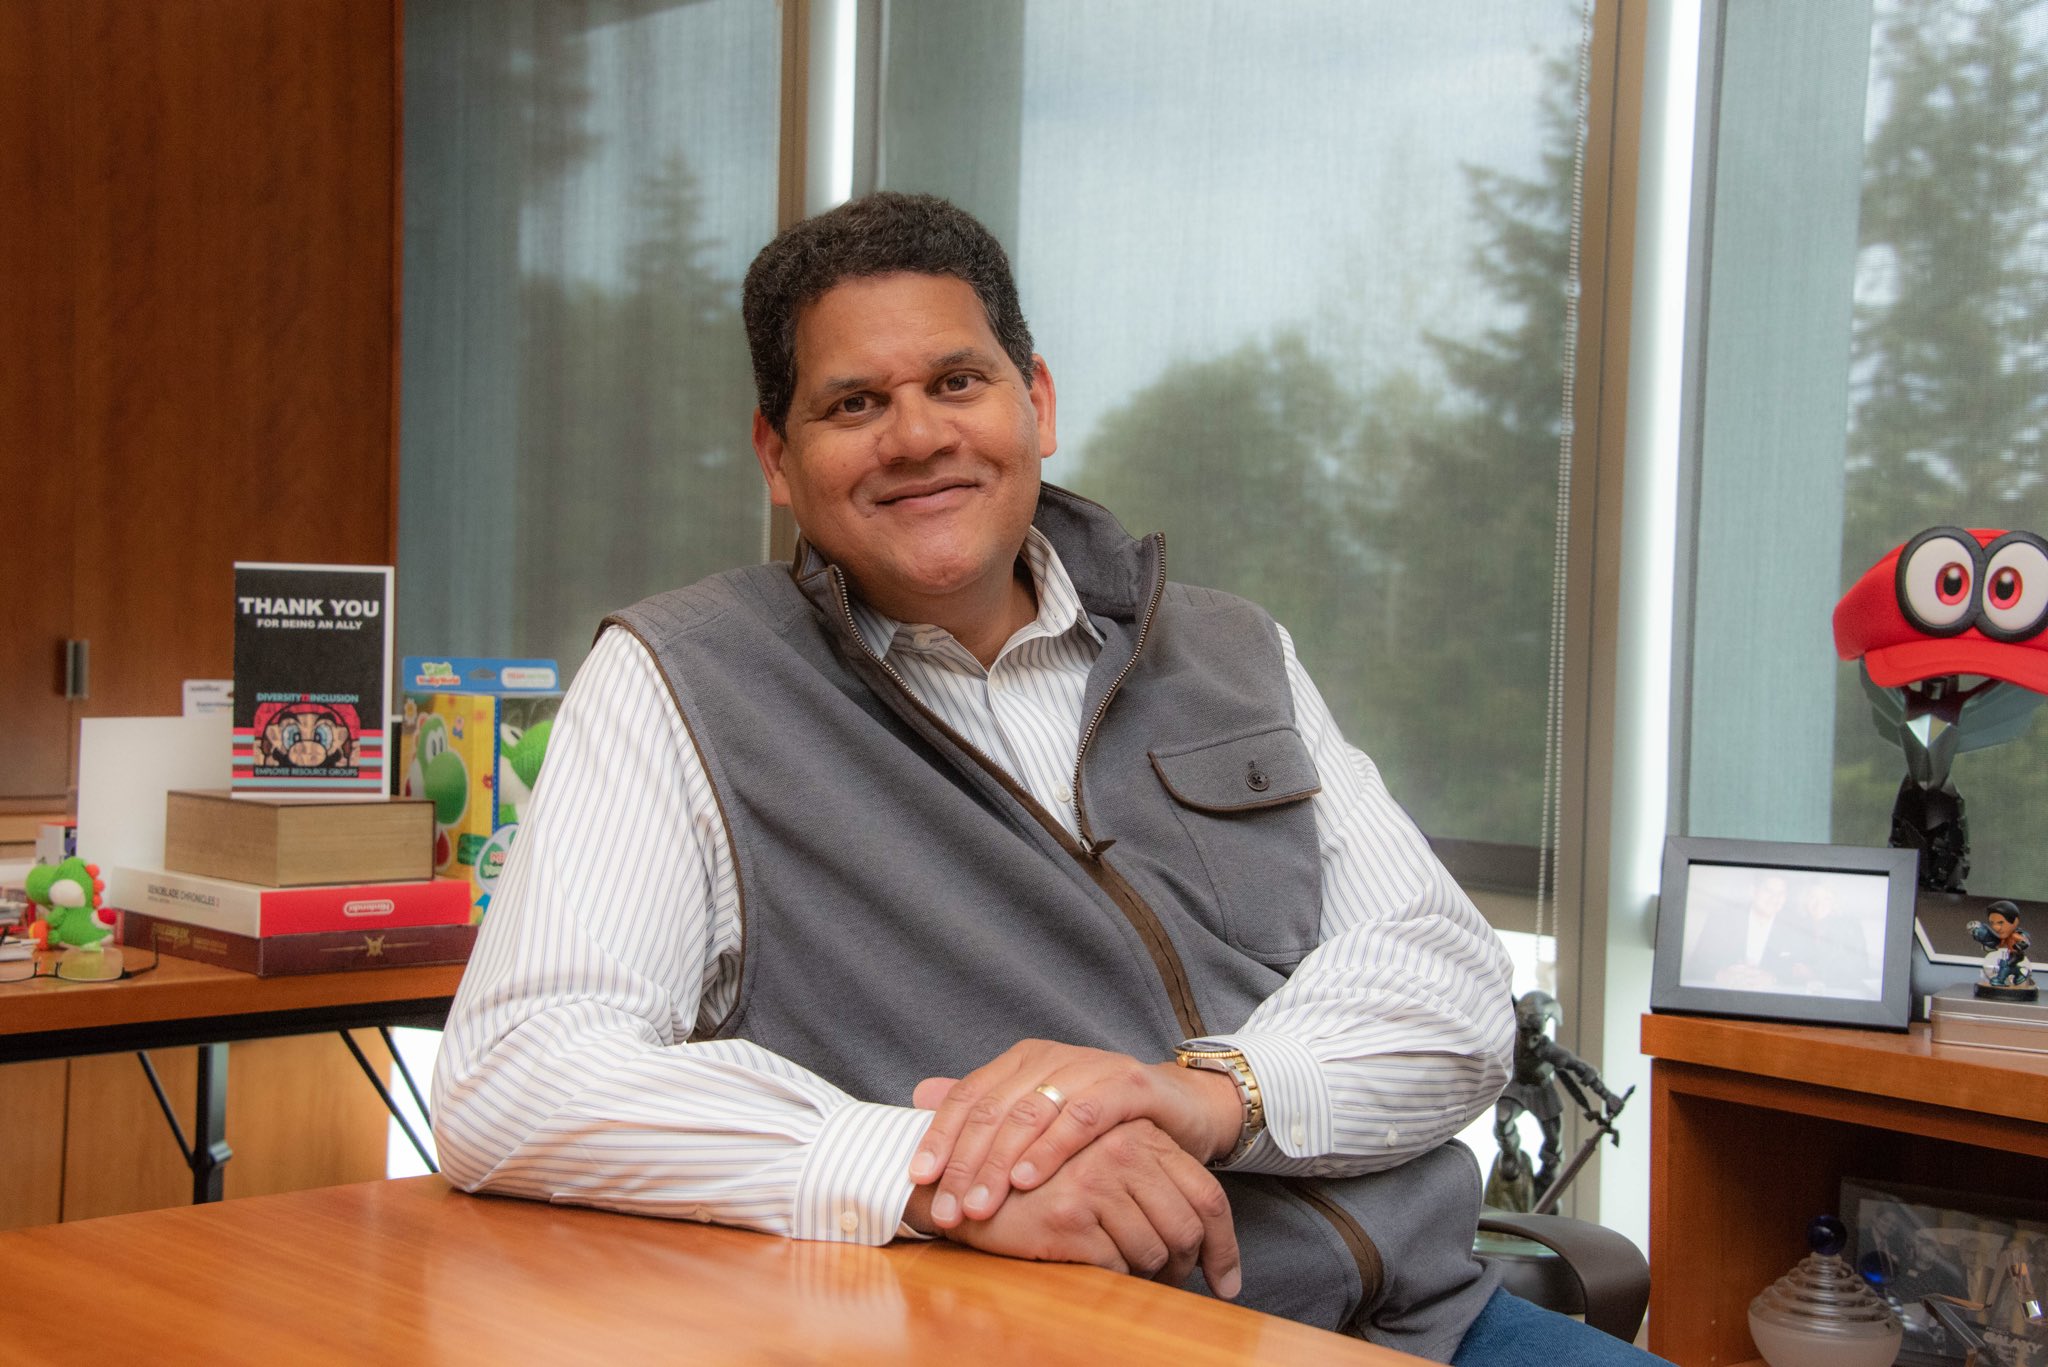 Reggie Fils-Aime sitting at his desk, smiling. There is Nintendo paraphernalia on the shelves behind him.